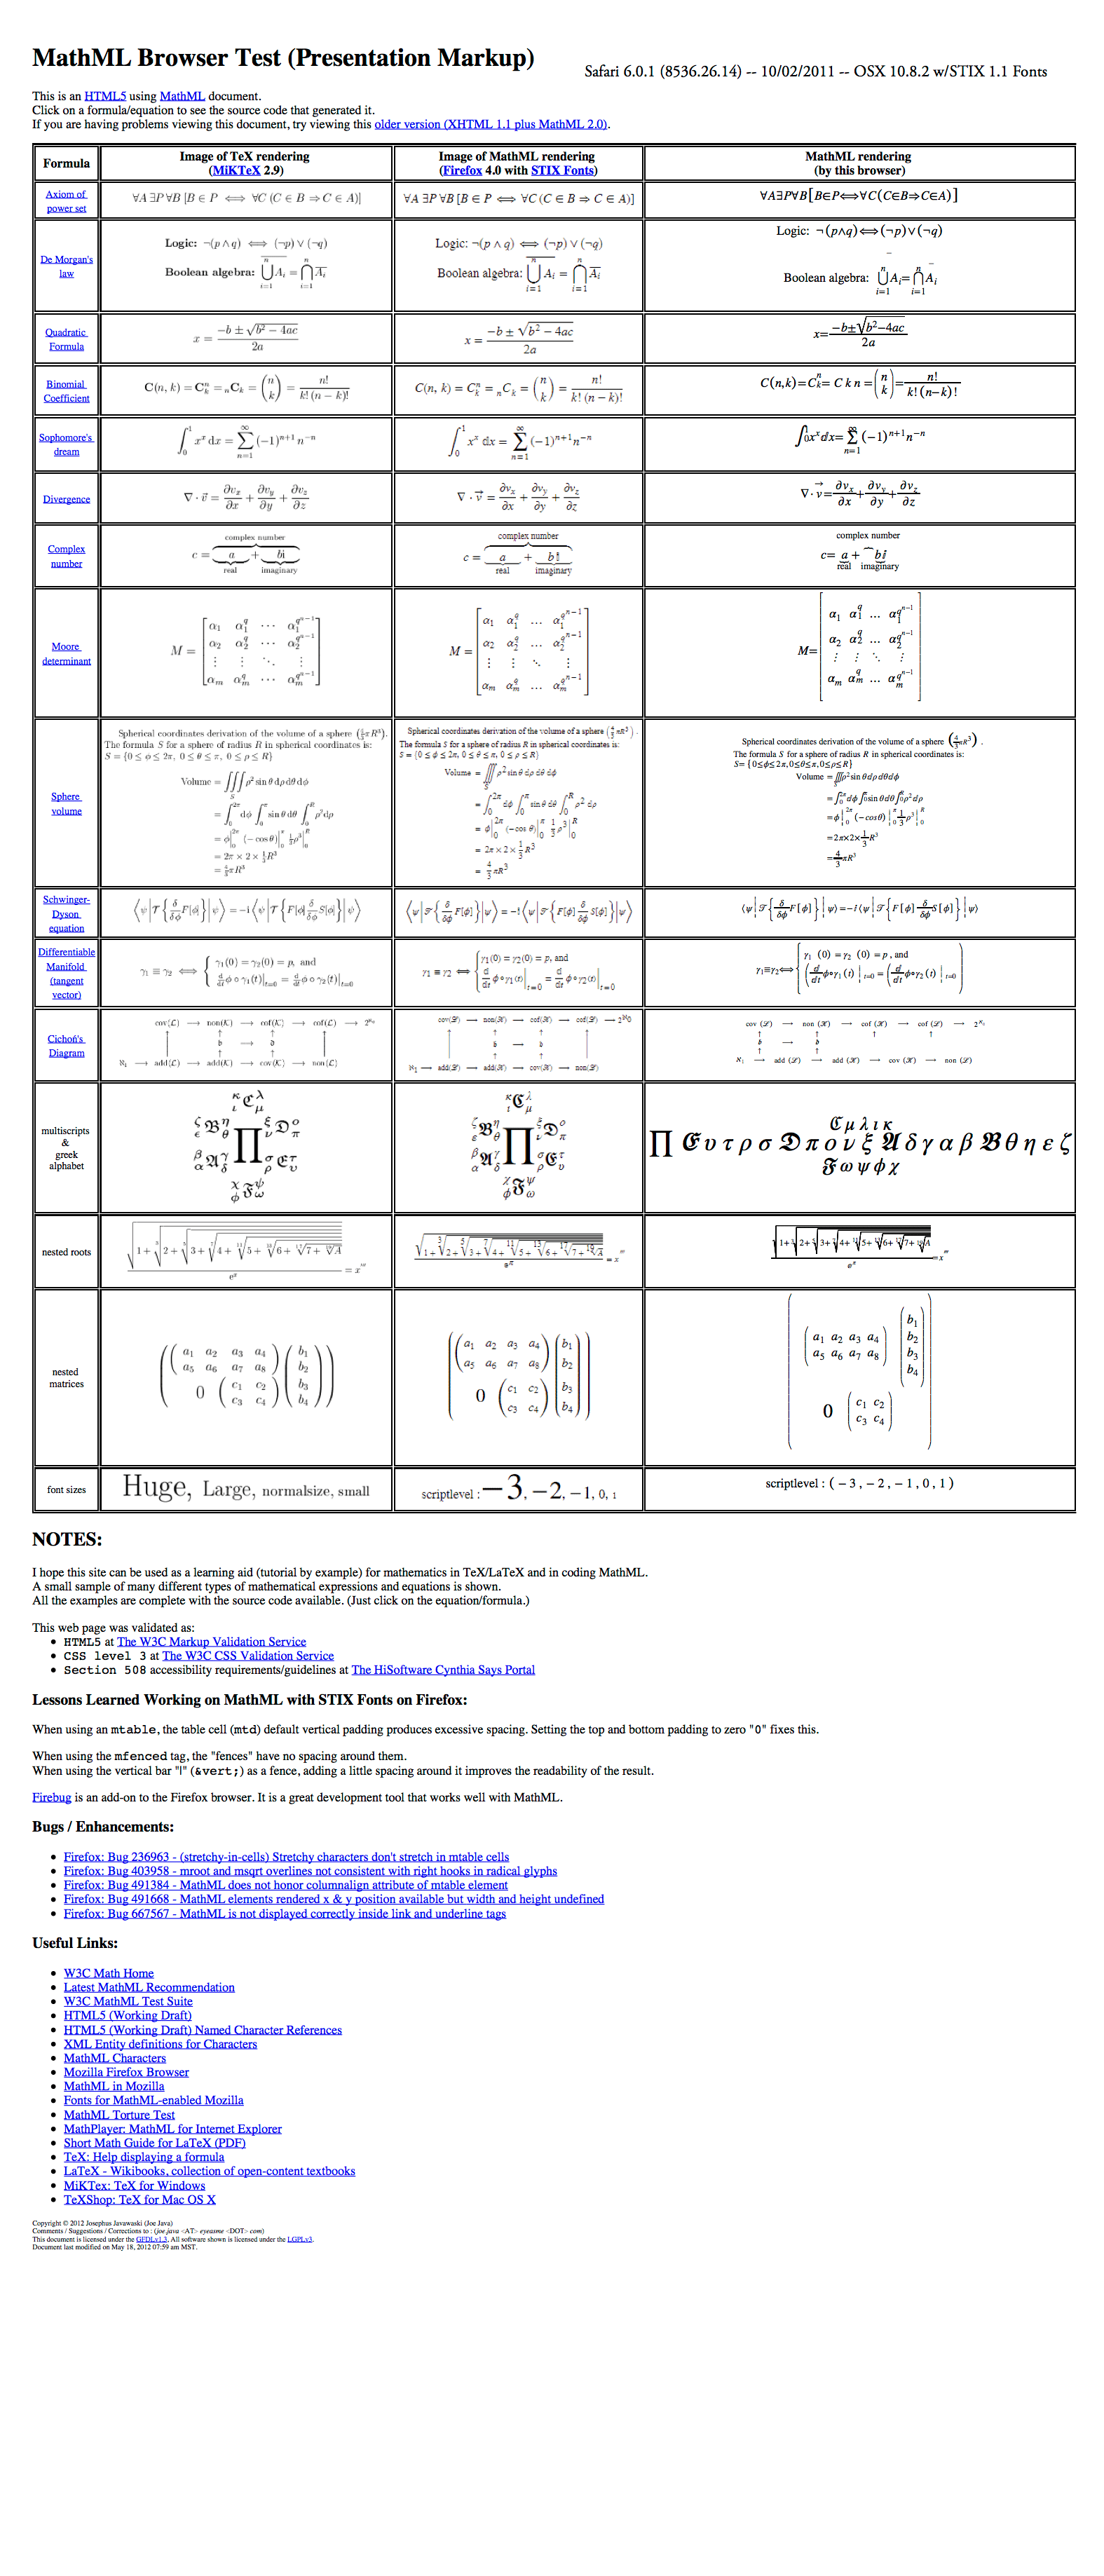 mathml_browser_test.png